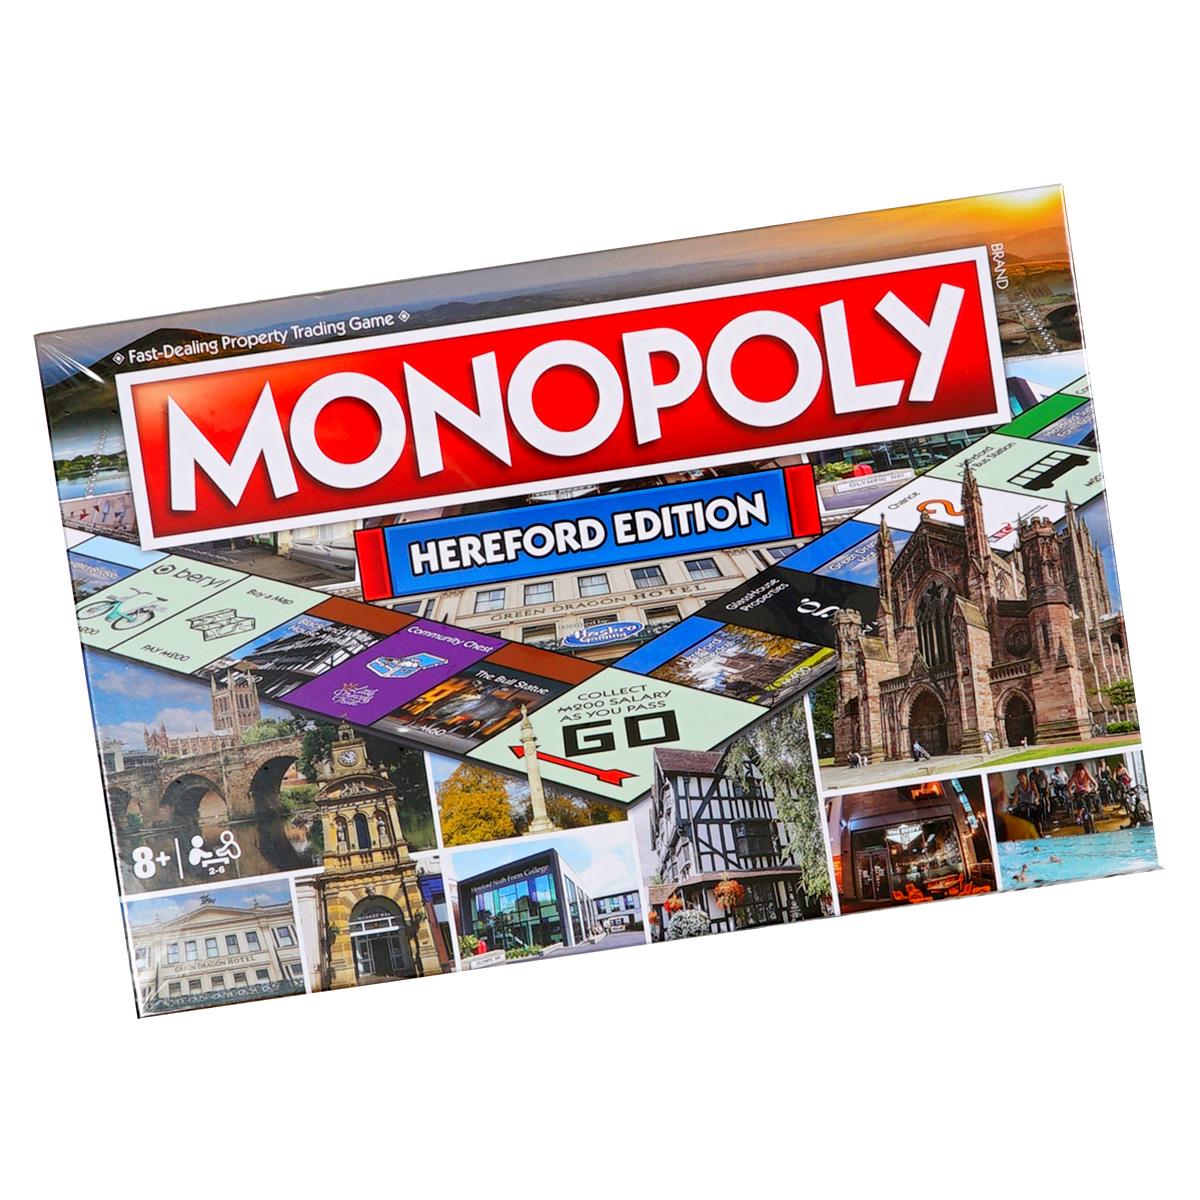 What progress did Hereford Monopoly make in 2021 regarding education?